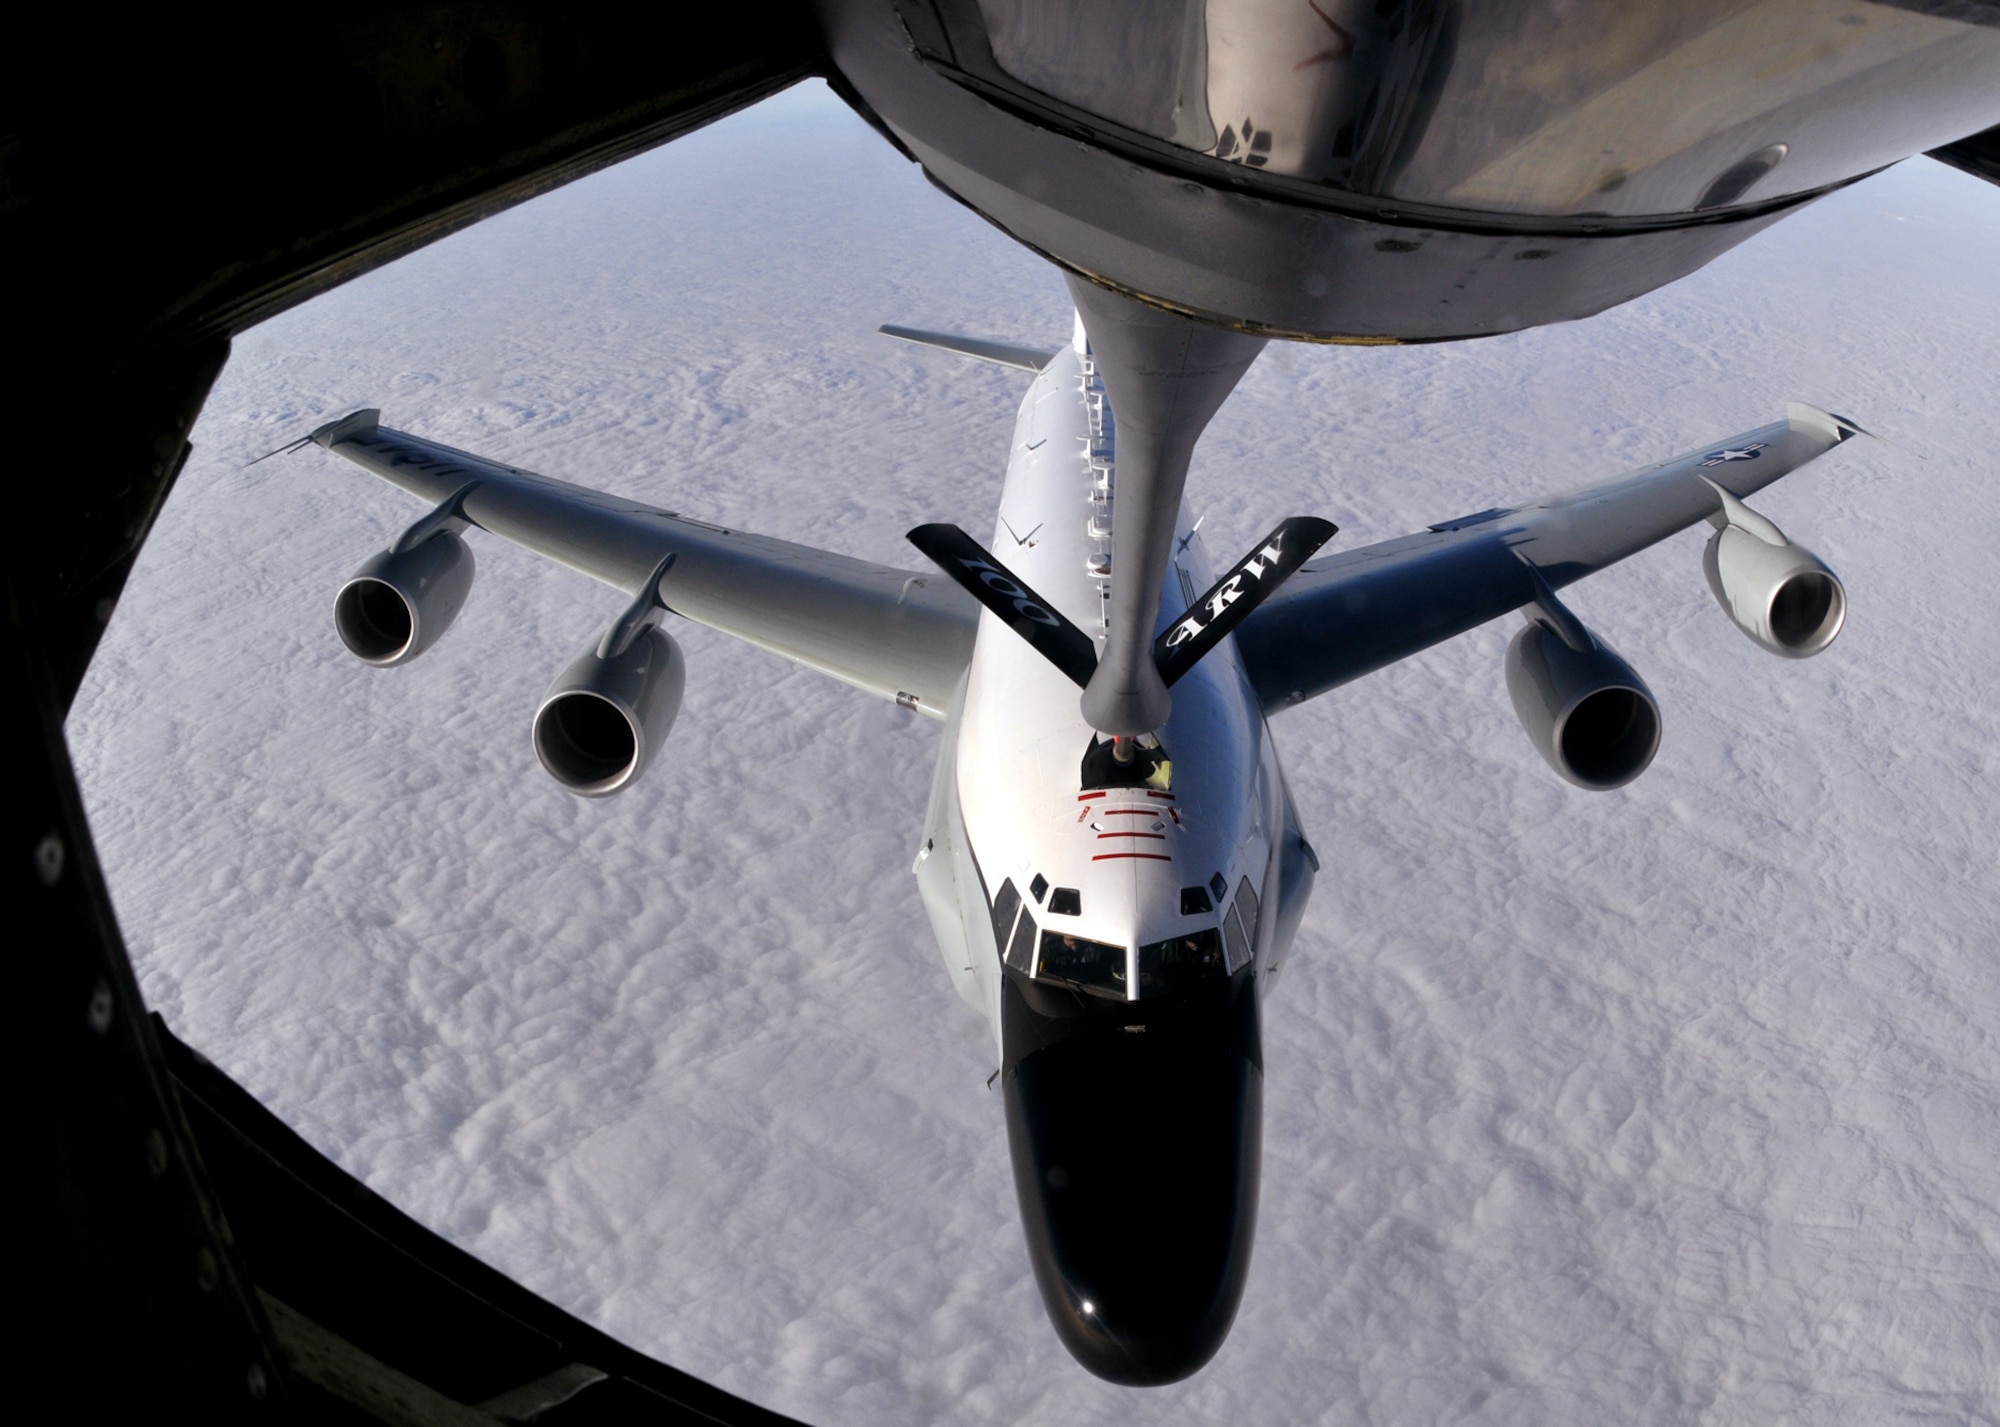 RAF MILDENHALL, England -- An RC-135 Rivet Joint, launched from RAF Mildenhall, takes fuel from a 100th Air Refueling Wing KC-135 in the skies over England Jan. 21.  The aircraft, assigned to the 55th Wing, Offutt Air Force Base, Neb., carries members of the 488th Intelligence Squadron and 95th Reconnaissance Squadron, both based at RAF Mildenhall.  (U.S. Air Force photo by Staff Sgt. Austin M. May)